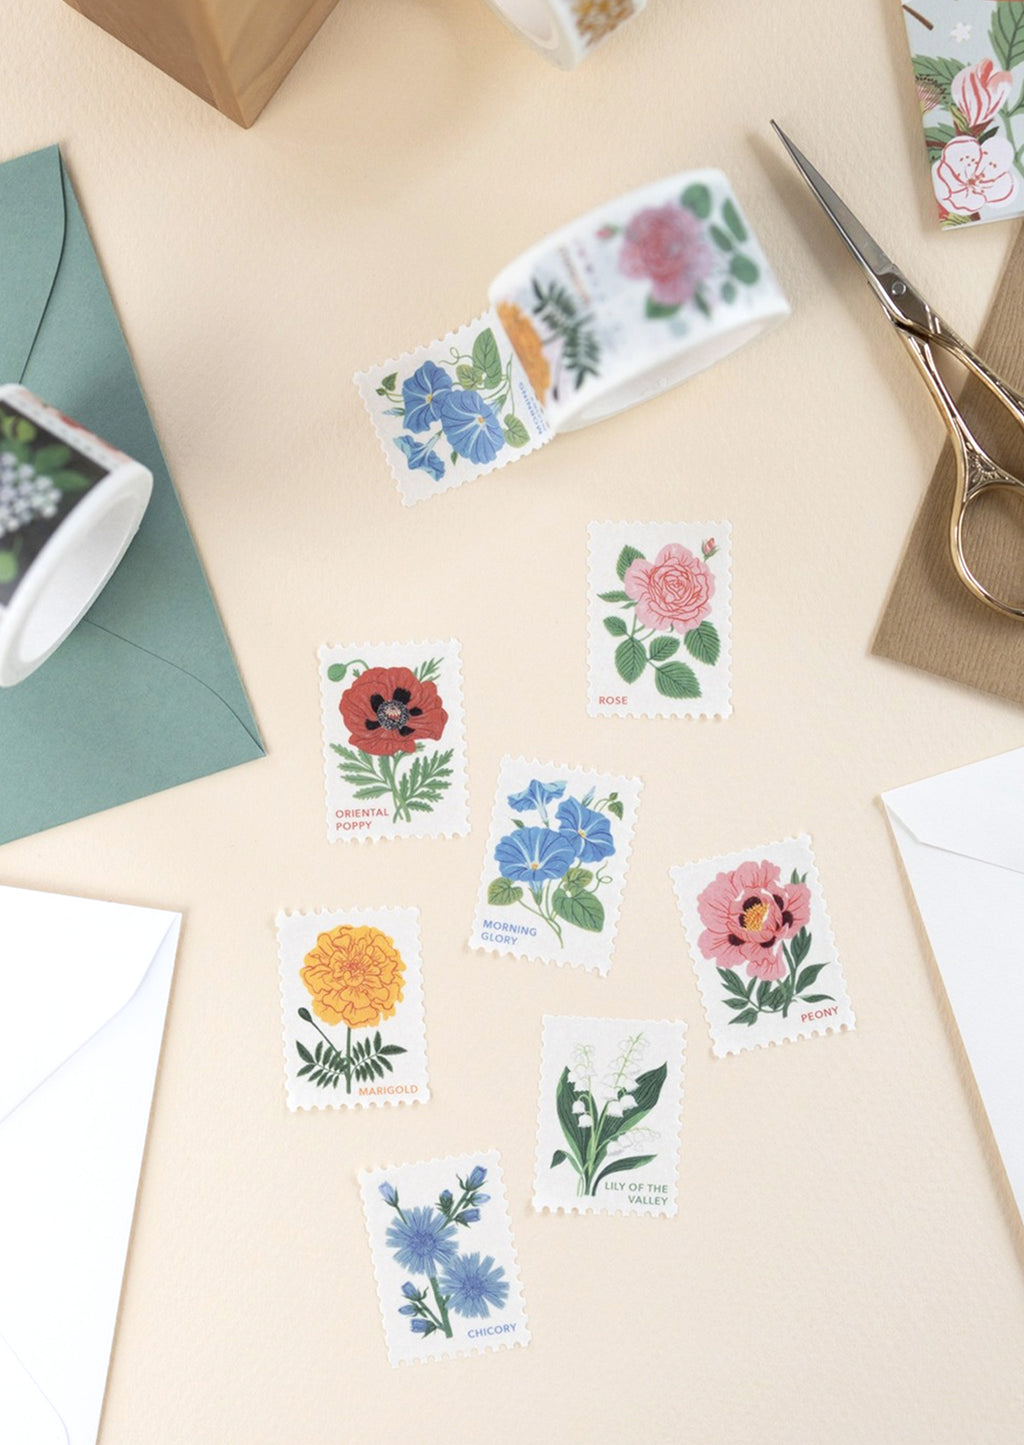 1: Floral stamp washi tape with perforated design.